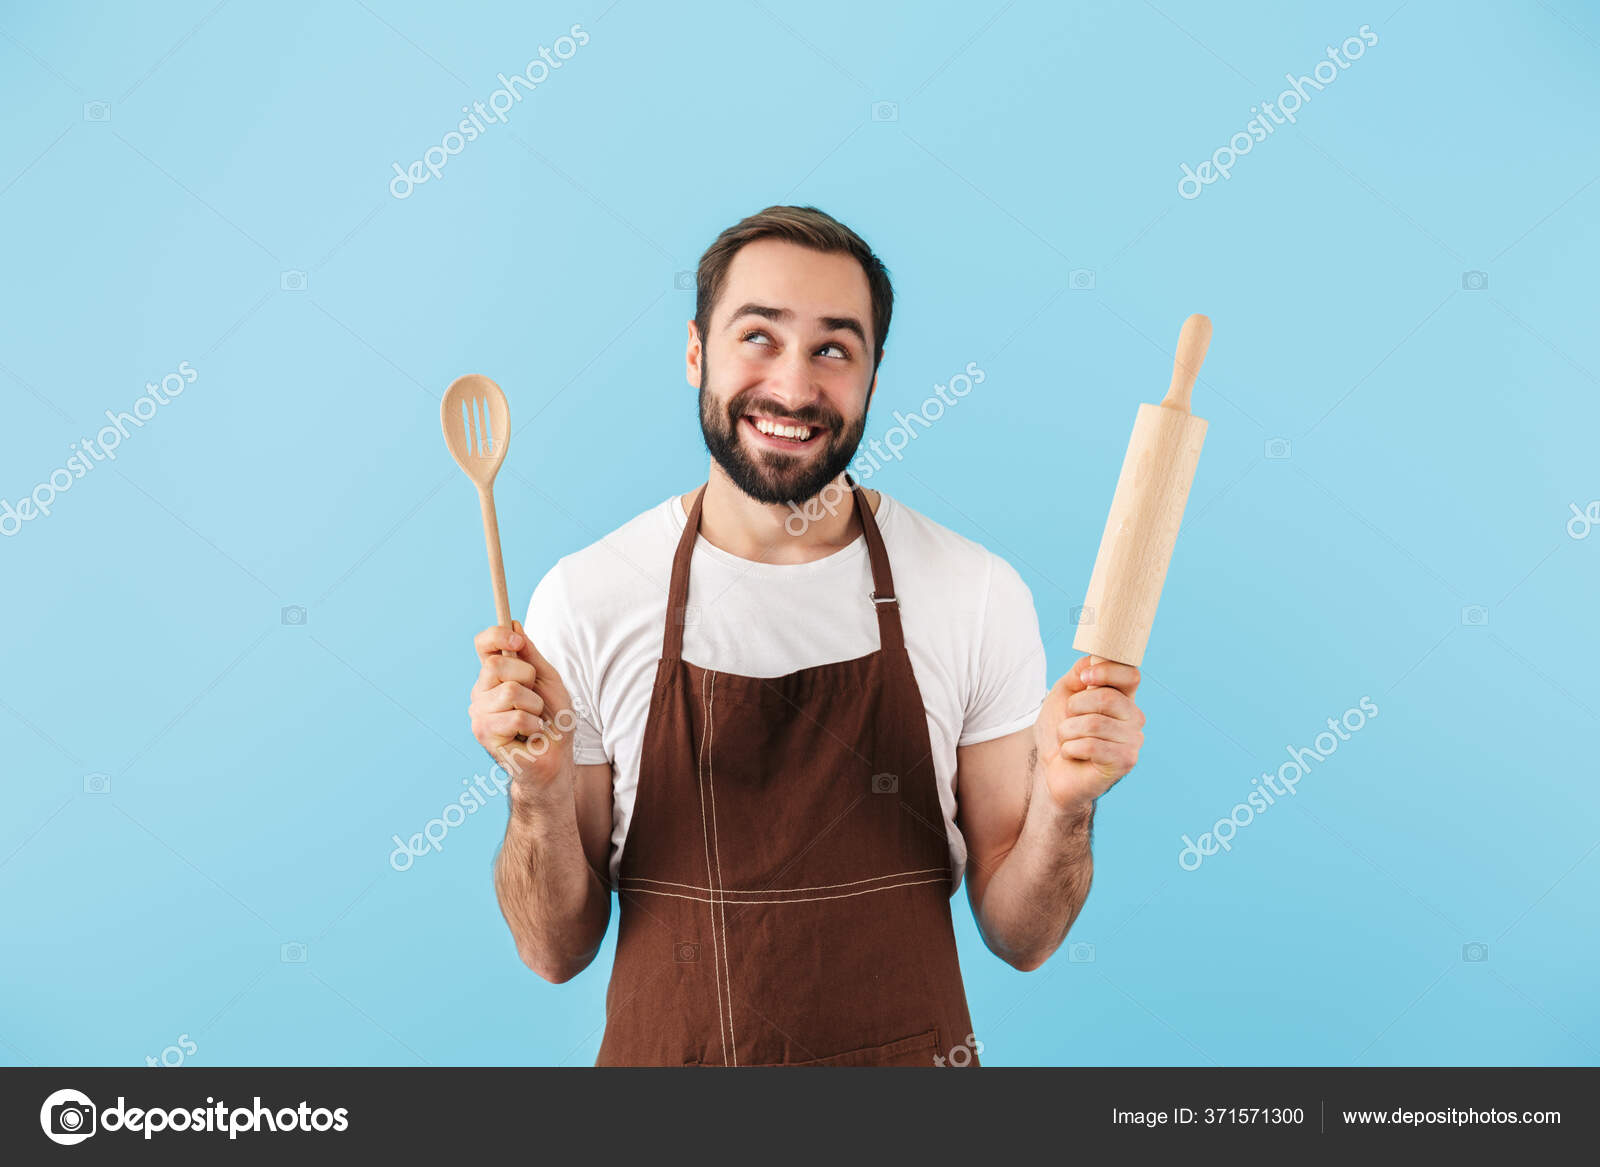 Cheerful young man baker standing at bakery holding bread Stock Photo by  vadymvdrobot